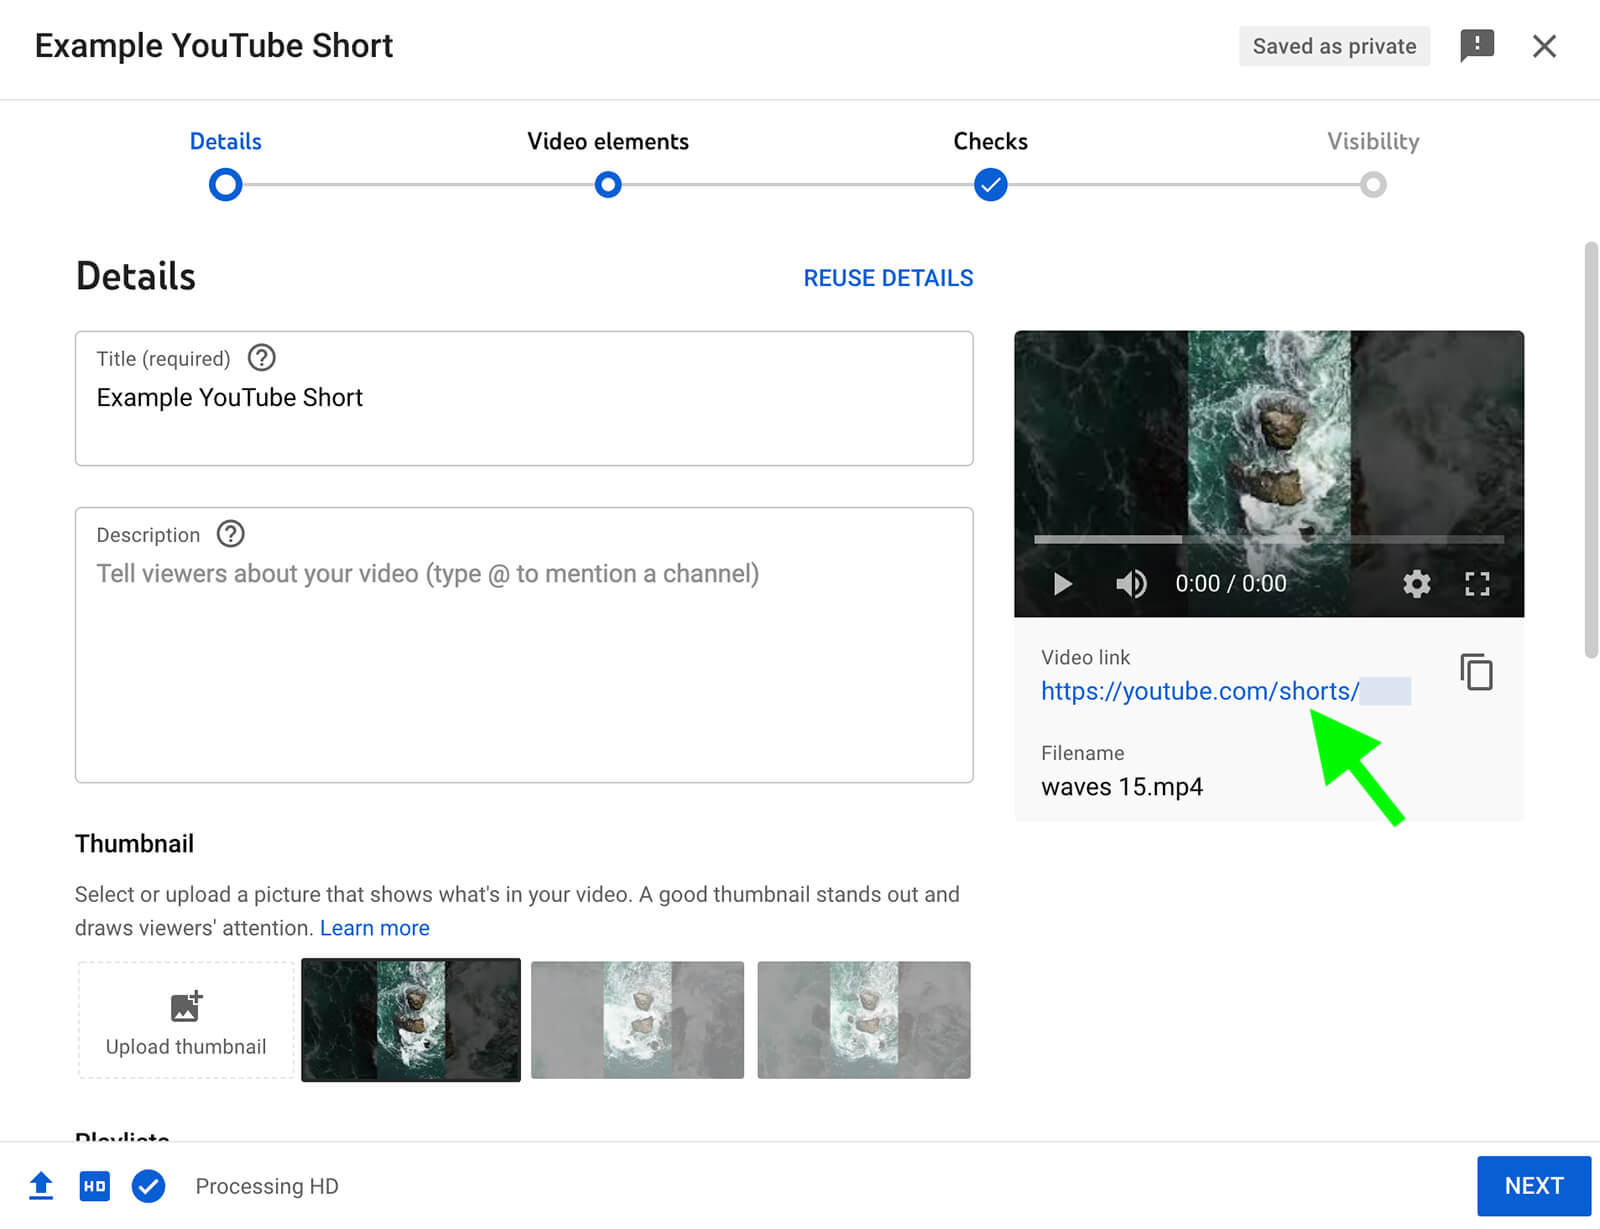 how-to-create-a-short-form-video-workflow-publish-9-16-aspect-ratio-post-to-youtube-example-11